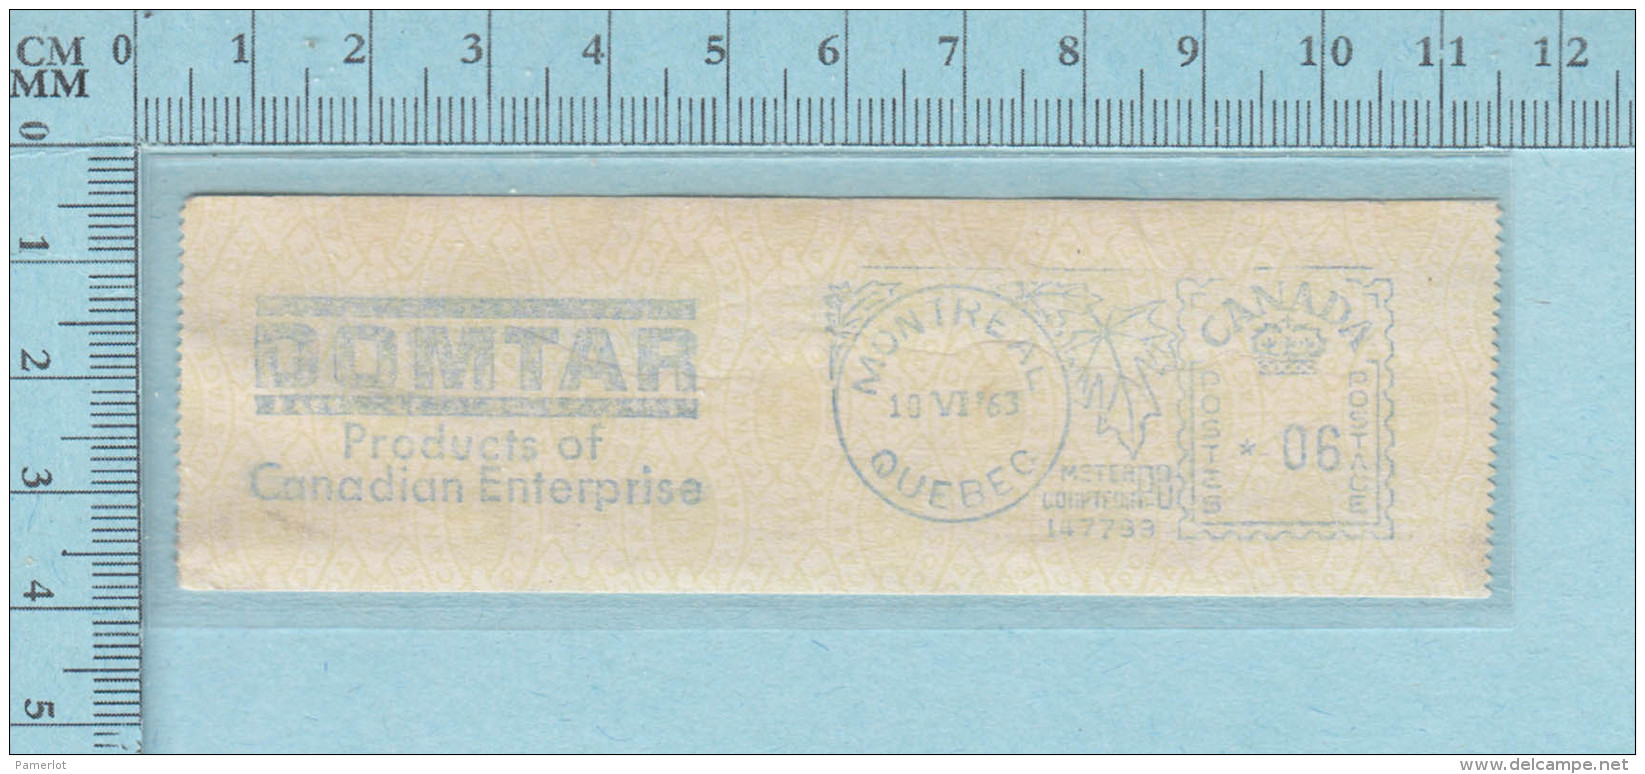 Timbre Canada EMA, Sticker Meter Stamp, 6&cent;, 1963, Domtar Product Is Canadian Entreprise  Pulp &amp; Paper - Used Stamps